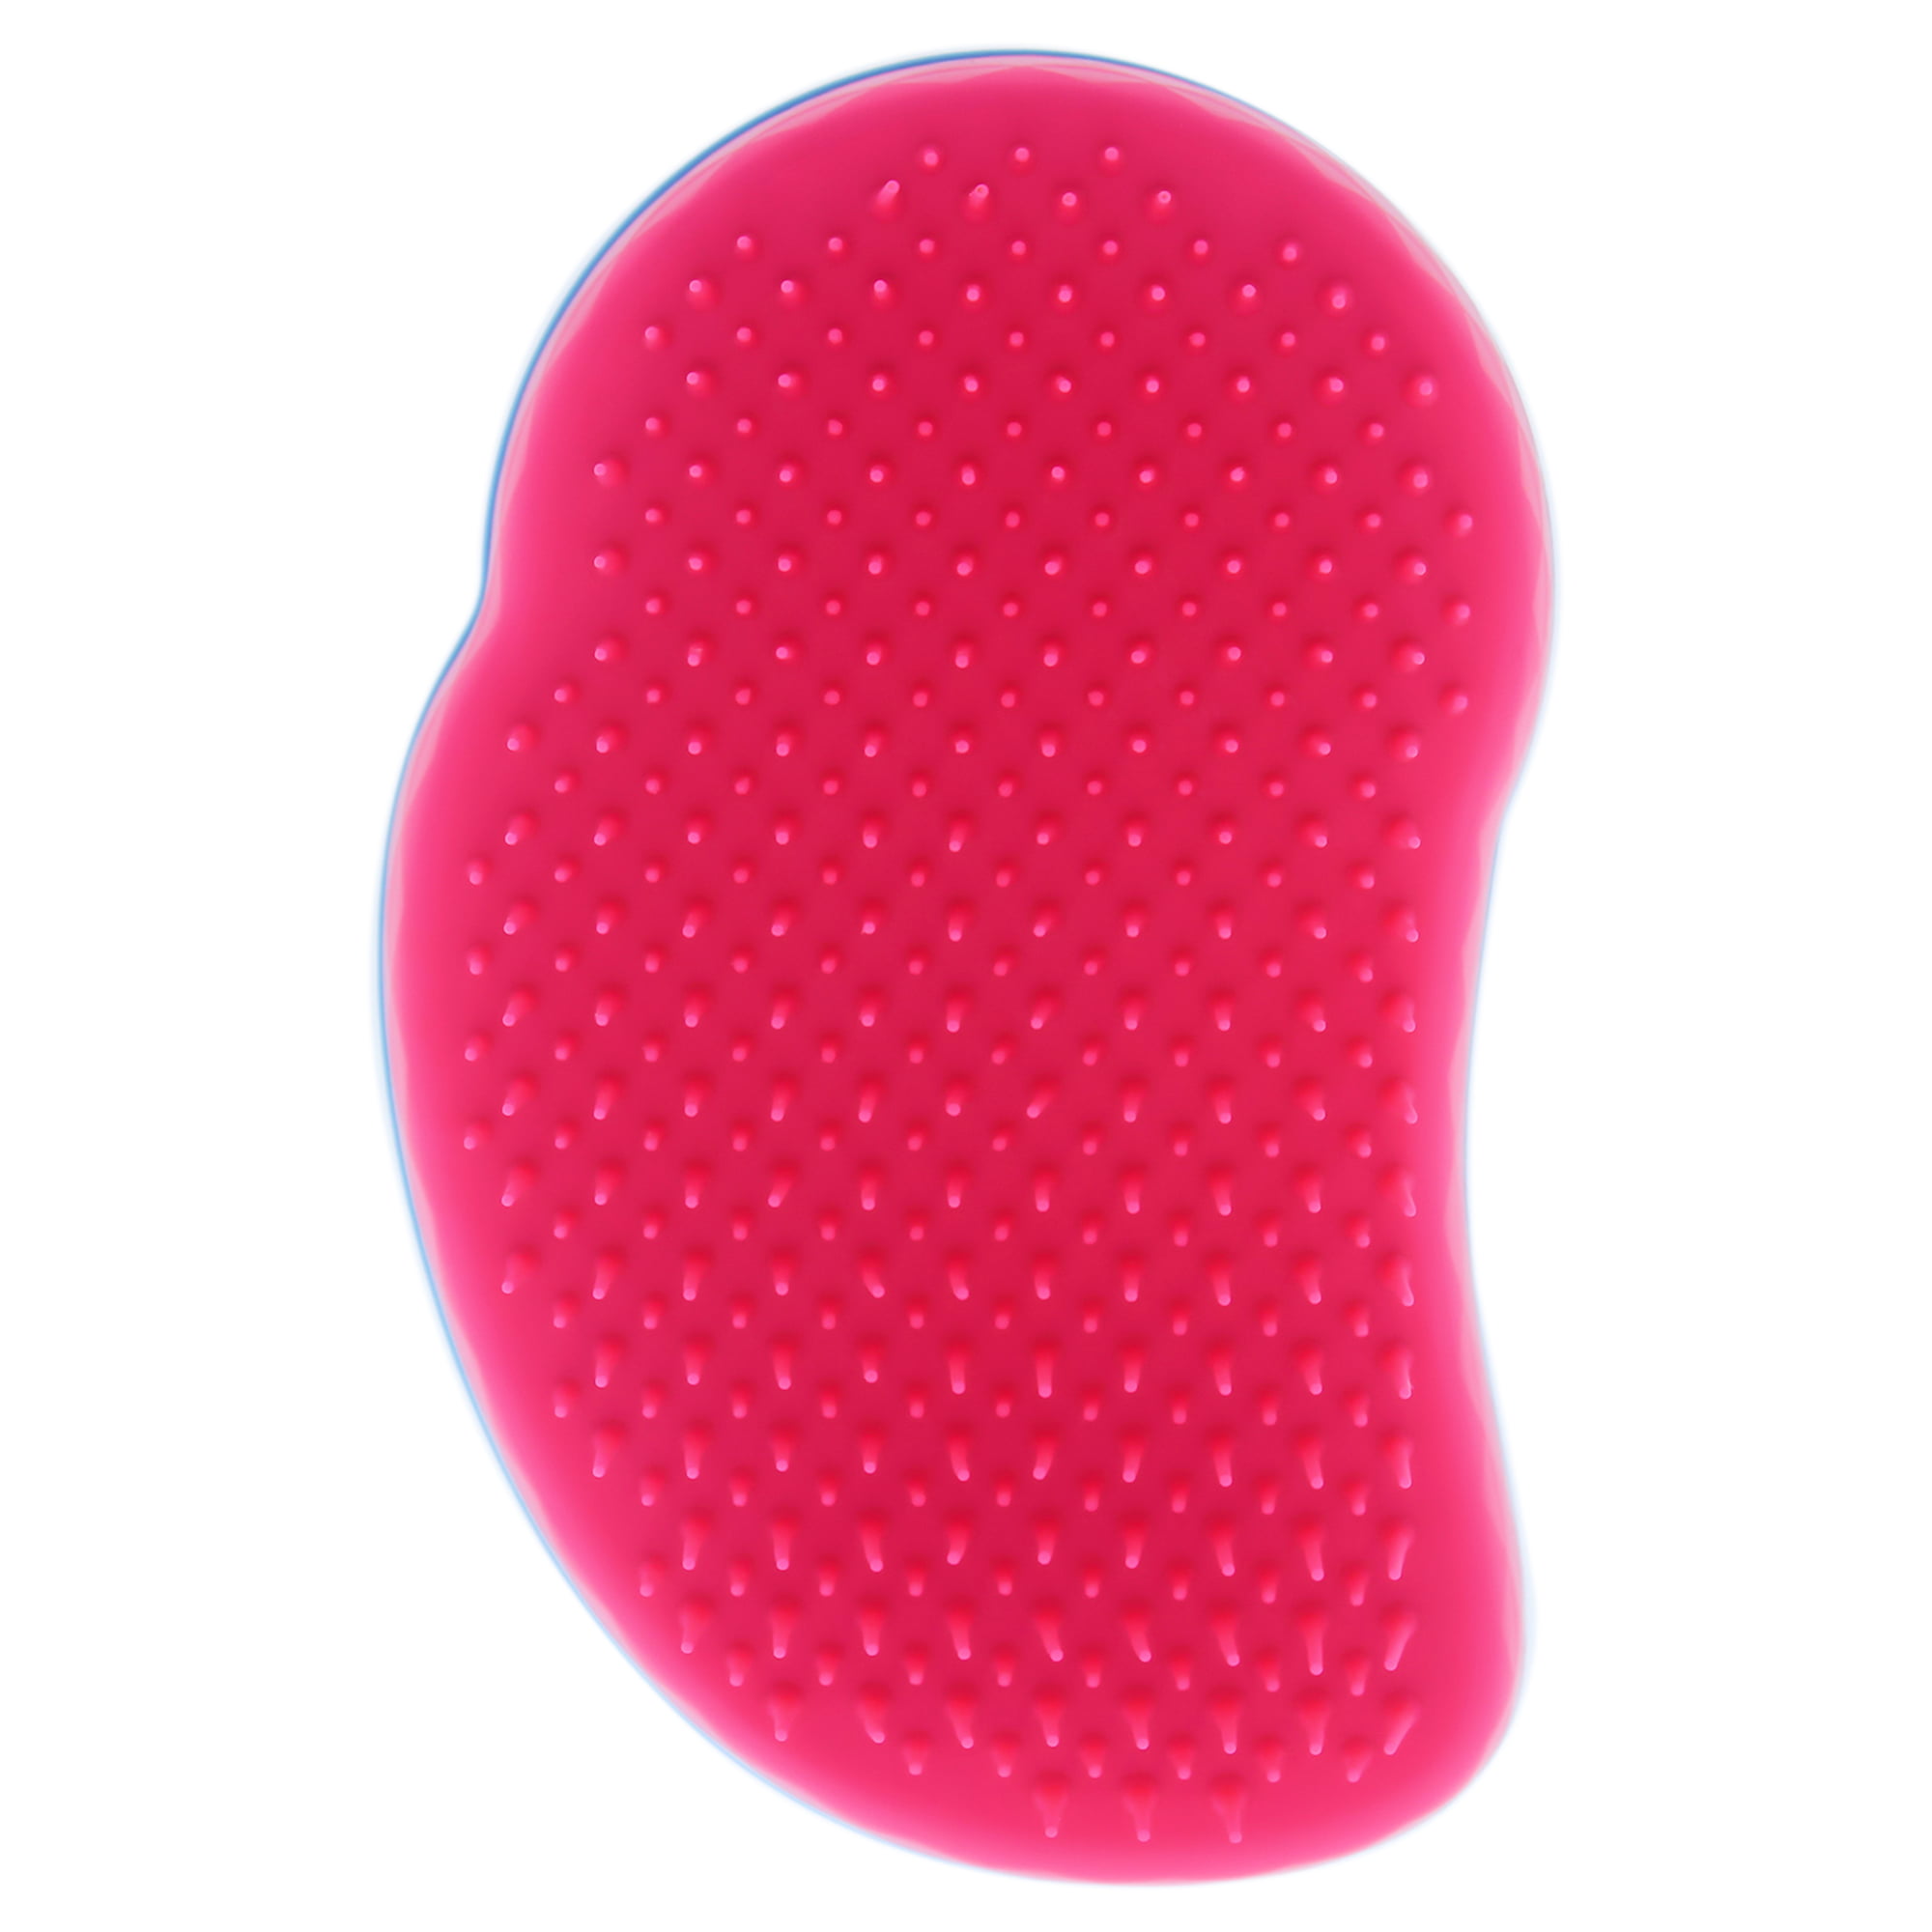 The Original Detangling Hairbrush - Blueberry Pop by Tangle Teezer for ...